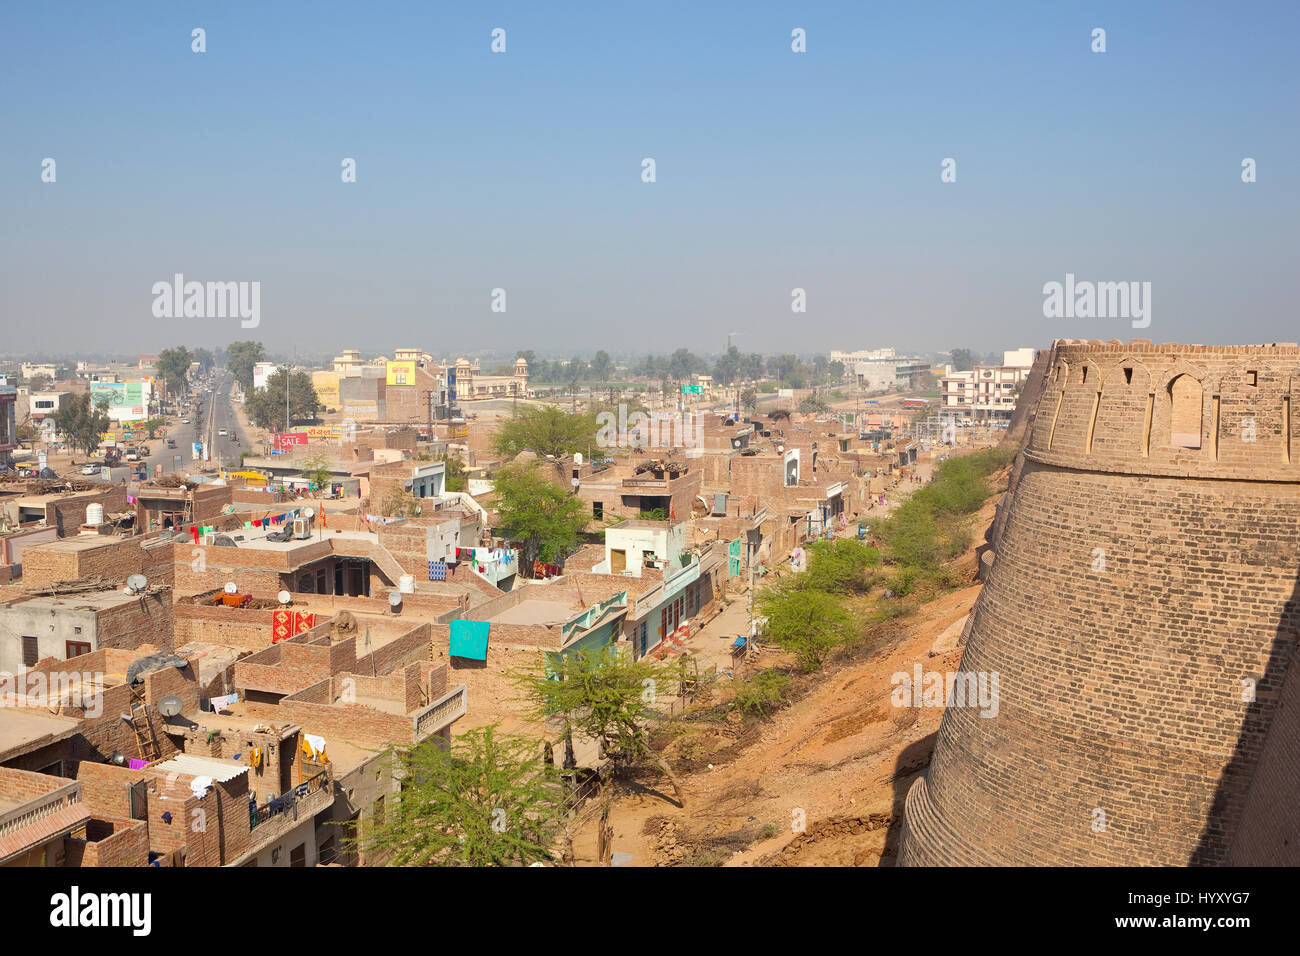 an aerial view of hanumangarh city rajasthan india from the restored walls of bhatner fort under a blue hazy sky Stock Photo